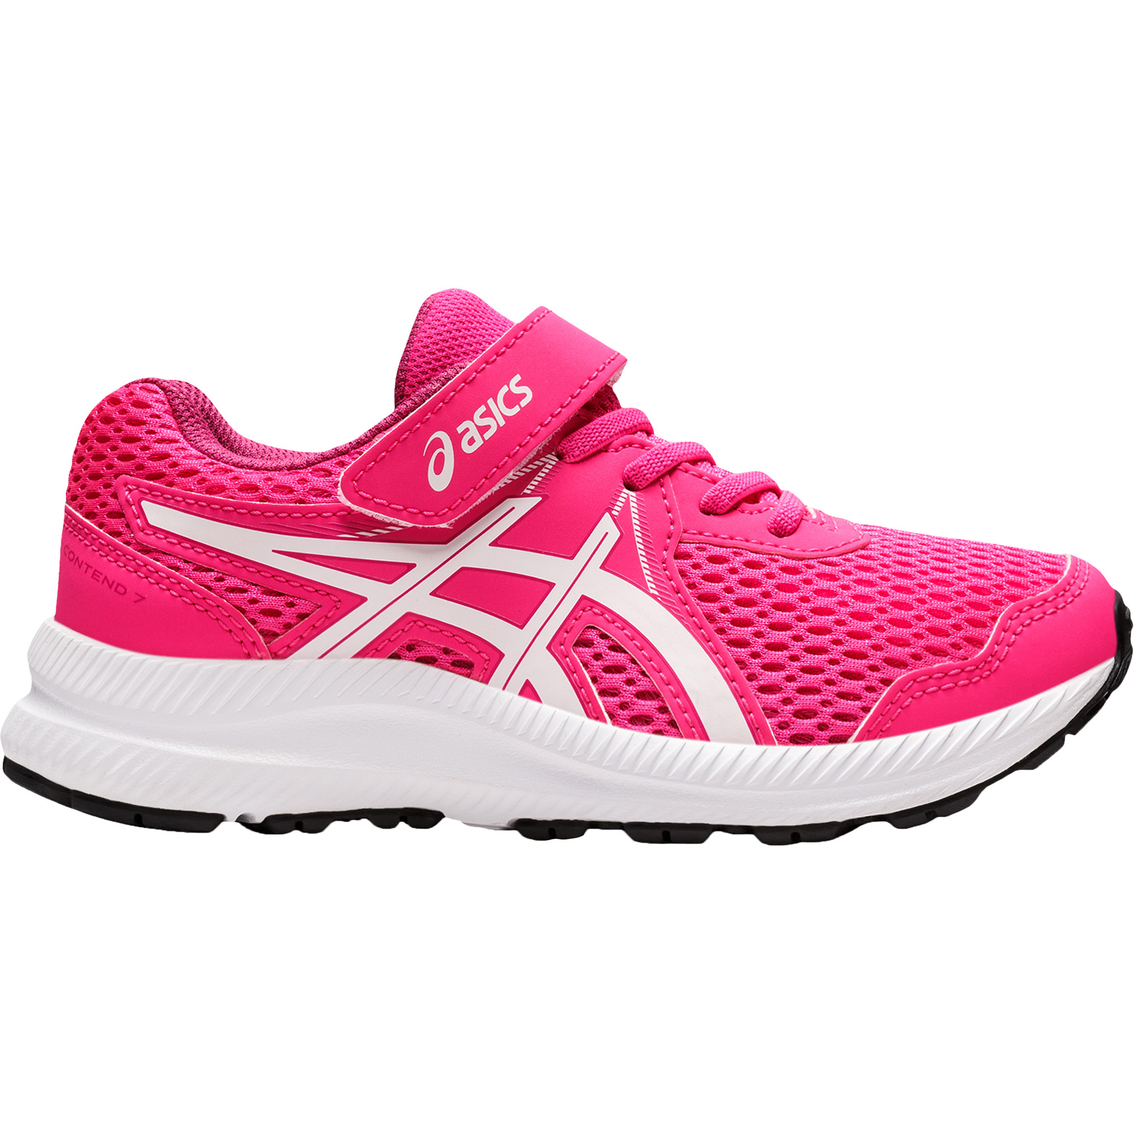 ASICS Preschool Girls Gel Contend 7 Athletic Shoes - Image 2 of 6